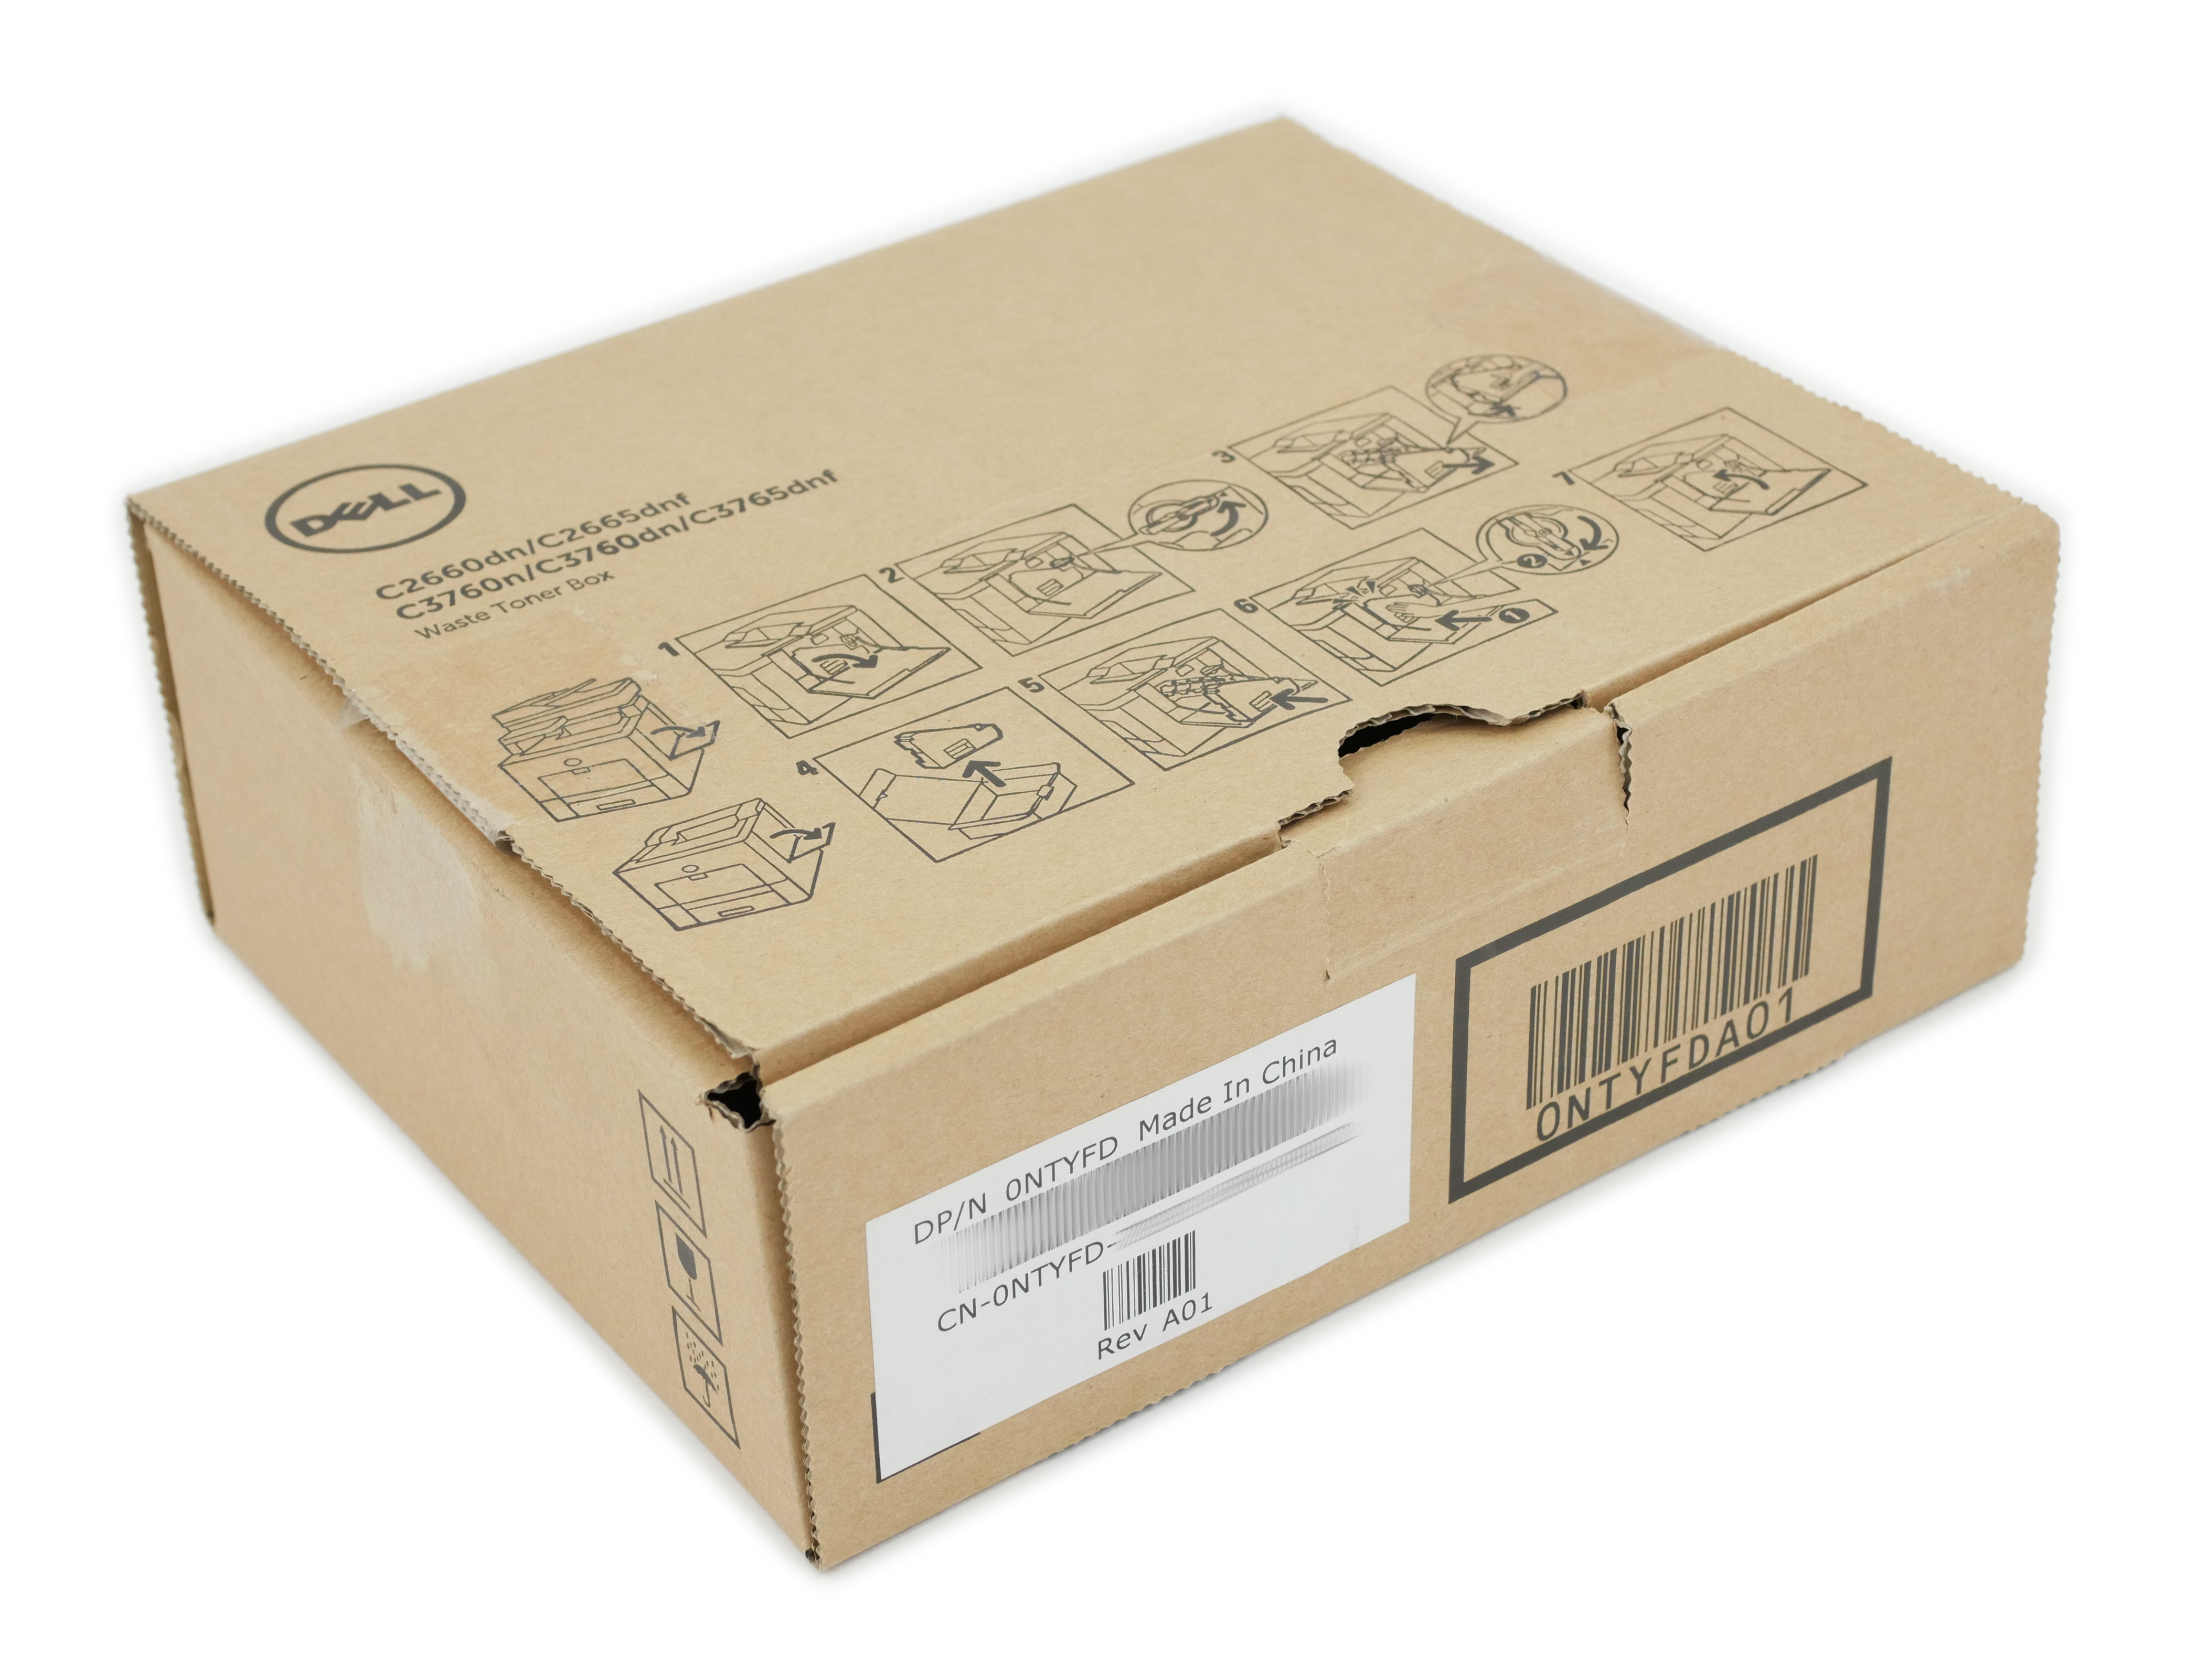 Dell Waste Toner Box NTYFD for C2660 C2665 C3760 C3765 S3840 - Click Image to Close